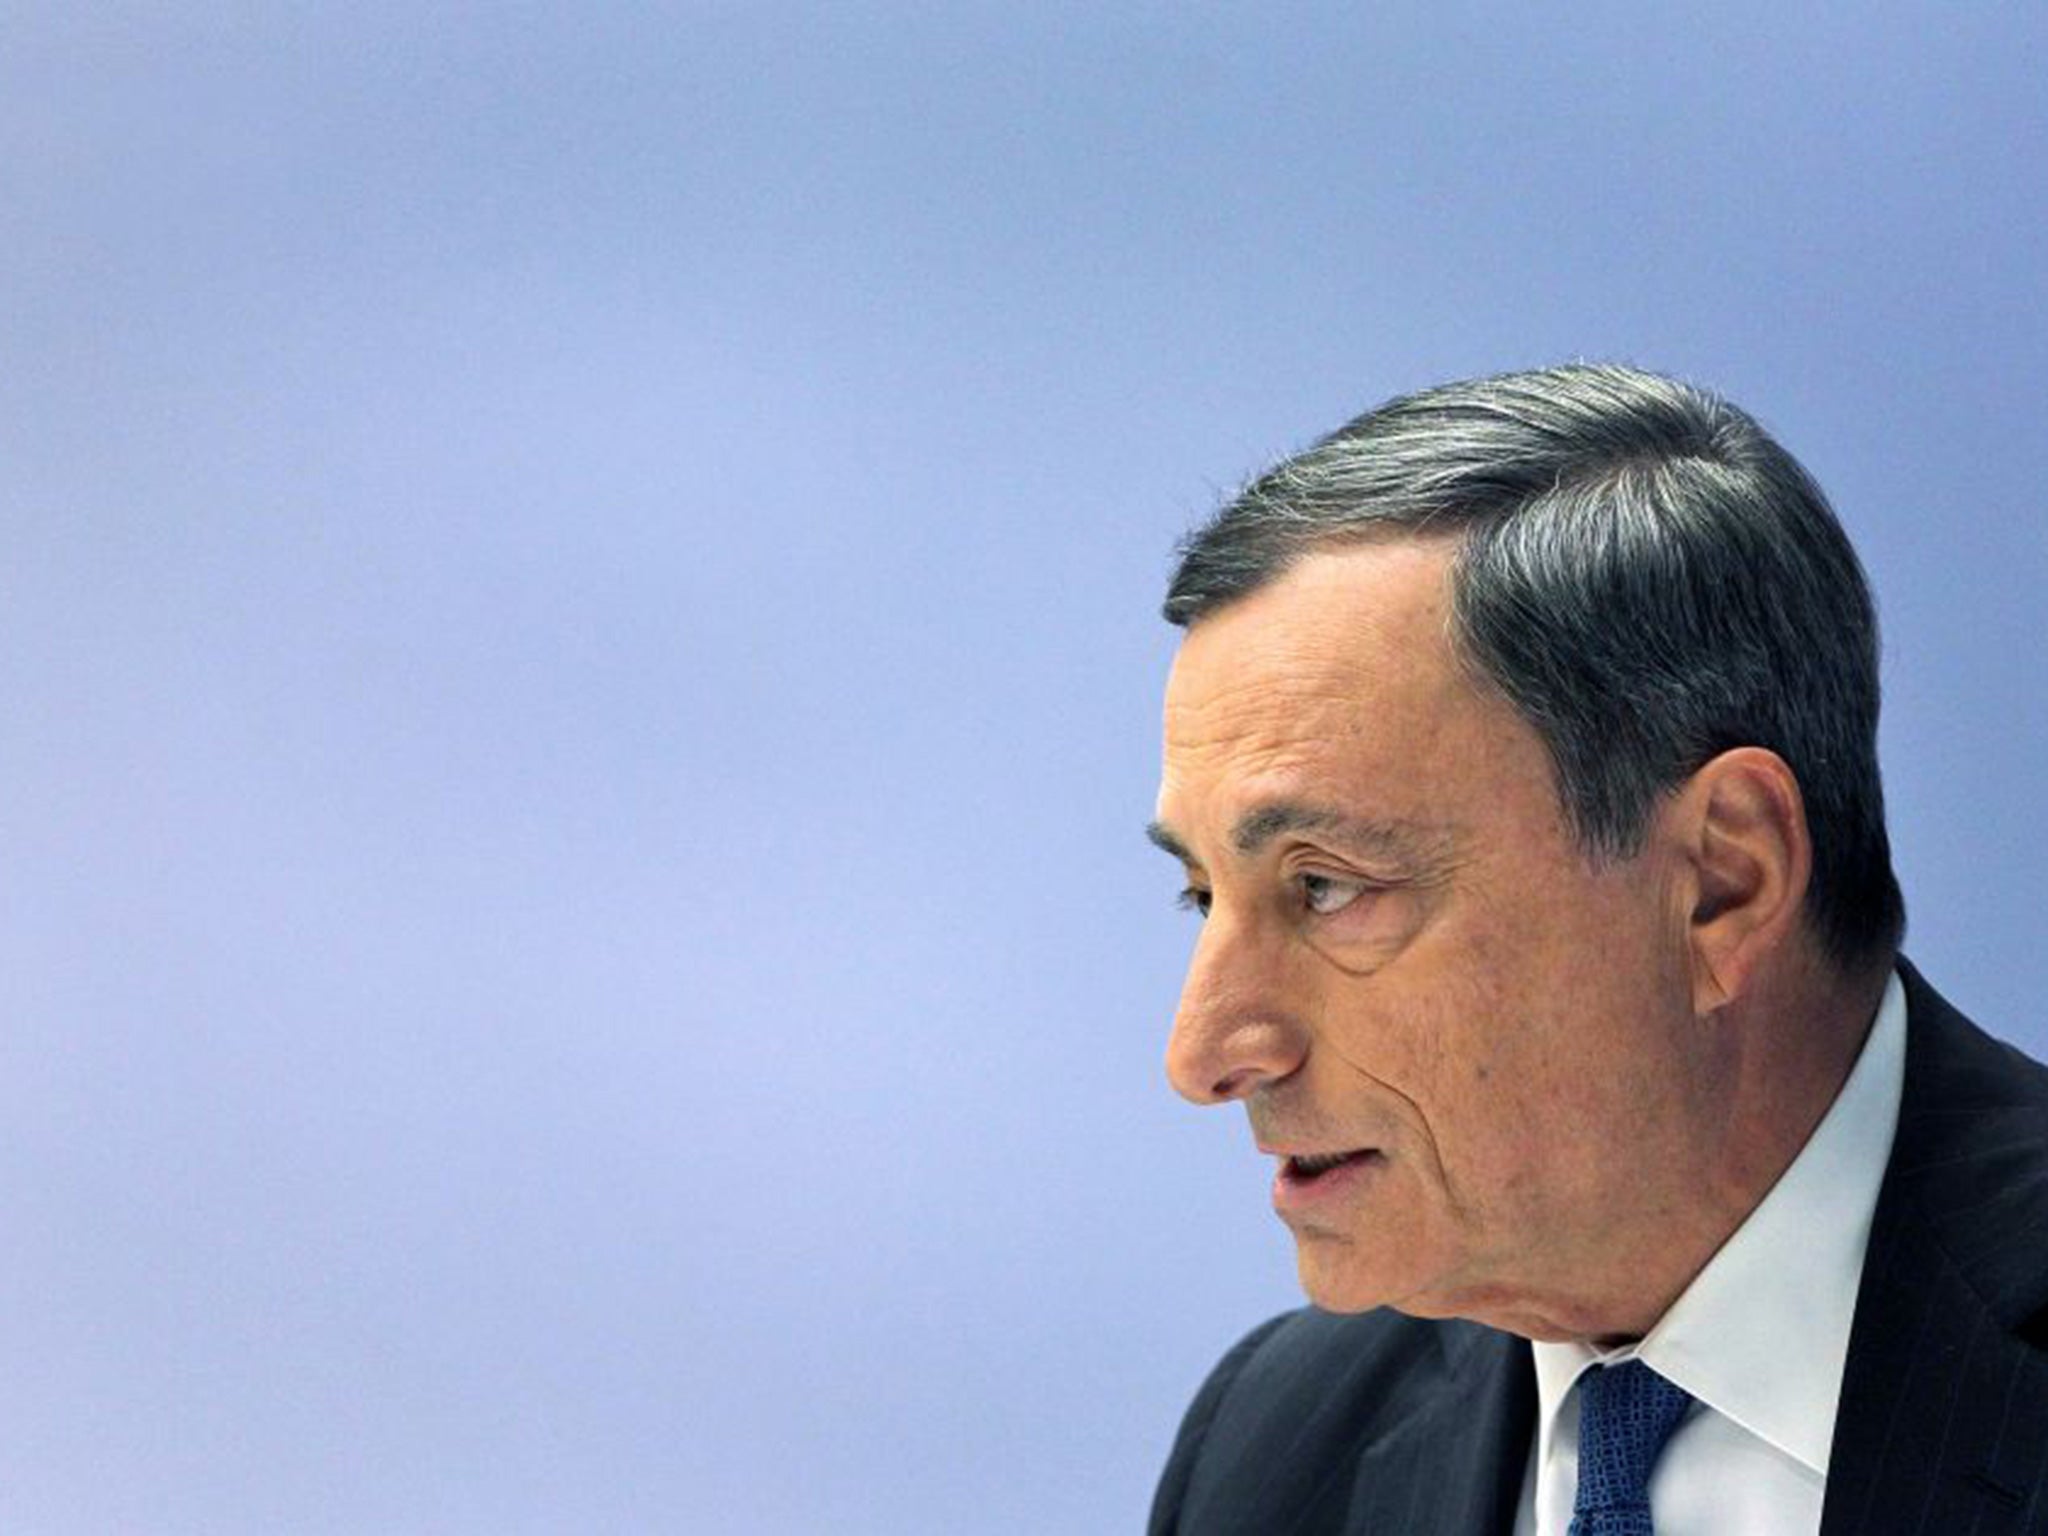 The fund had surged by up to 23 per cent in the first four months of the year in the wake of European Central Bank president Mario Draghi’s quantitative easing programme